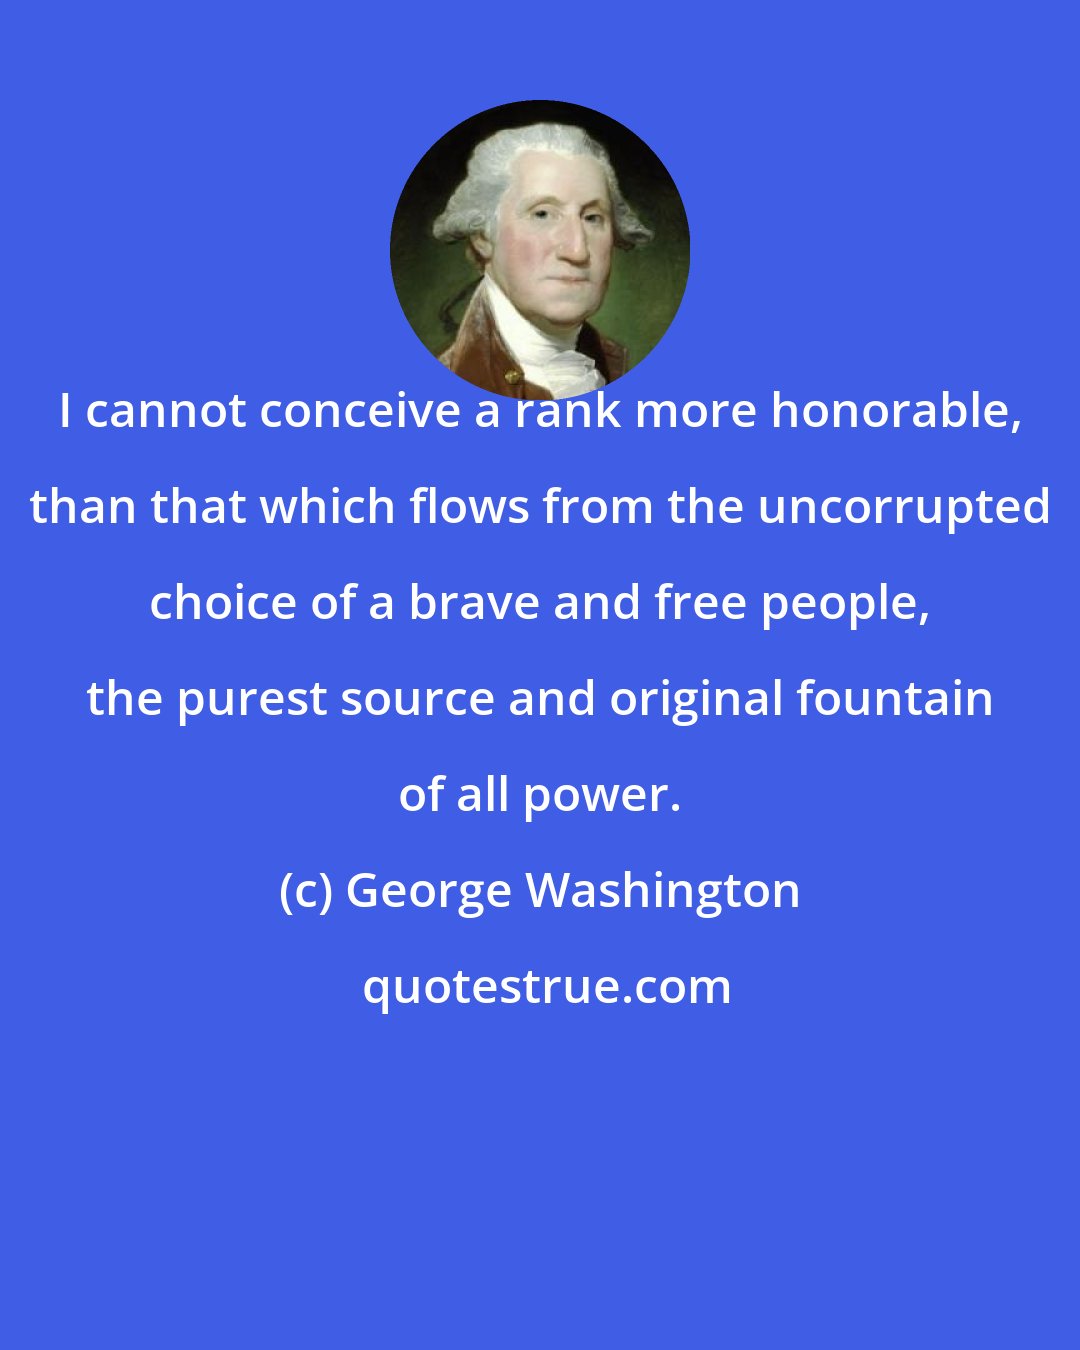 George Washington: I cannot conceive a rank more honorable, than that which flows from the uncorrupted choice of a brave and free people, the purest source and original fountain of all power.